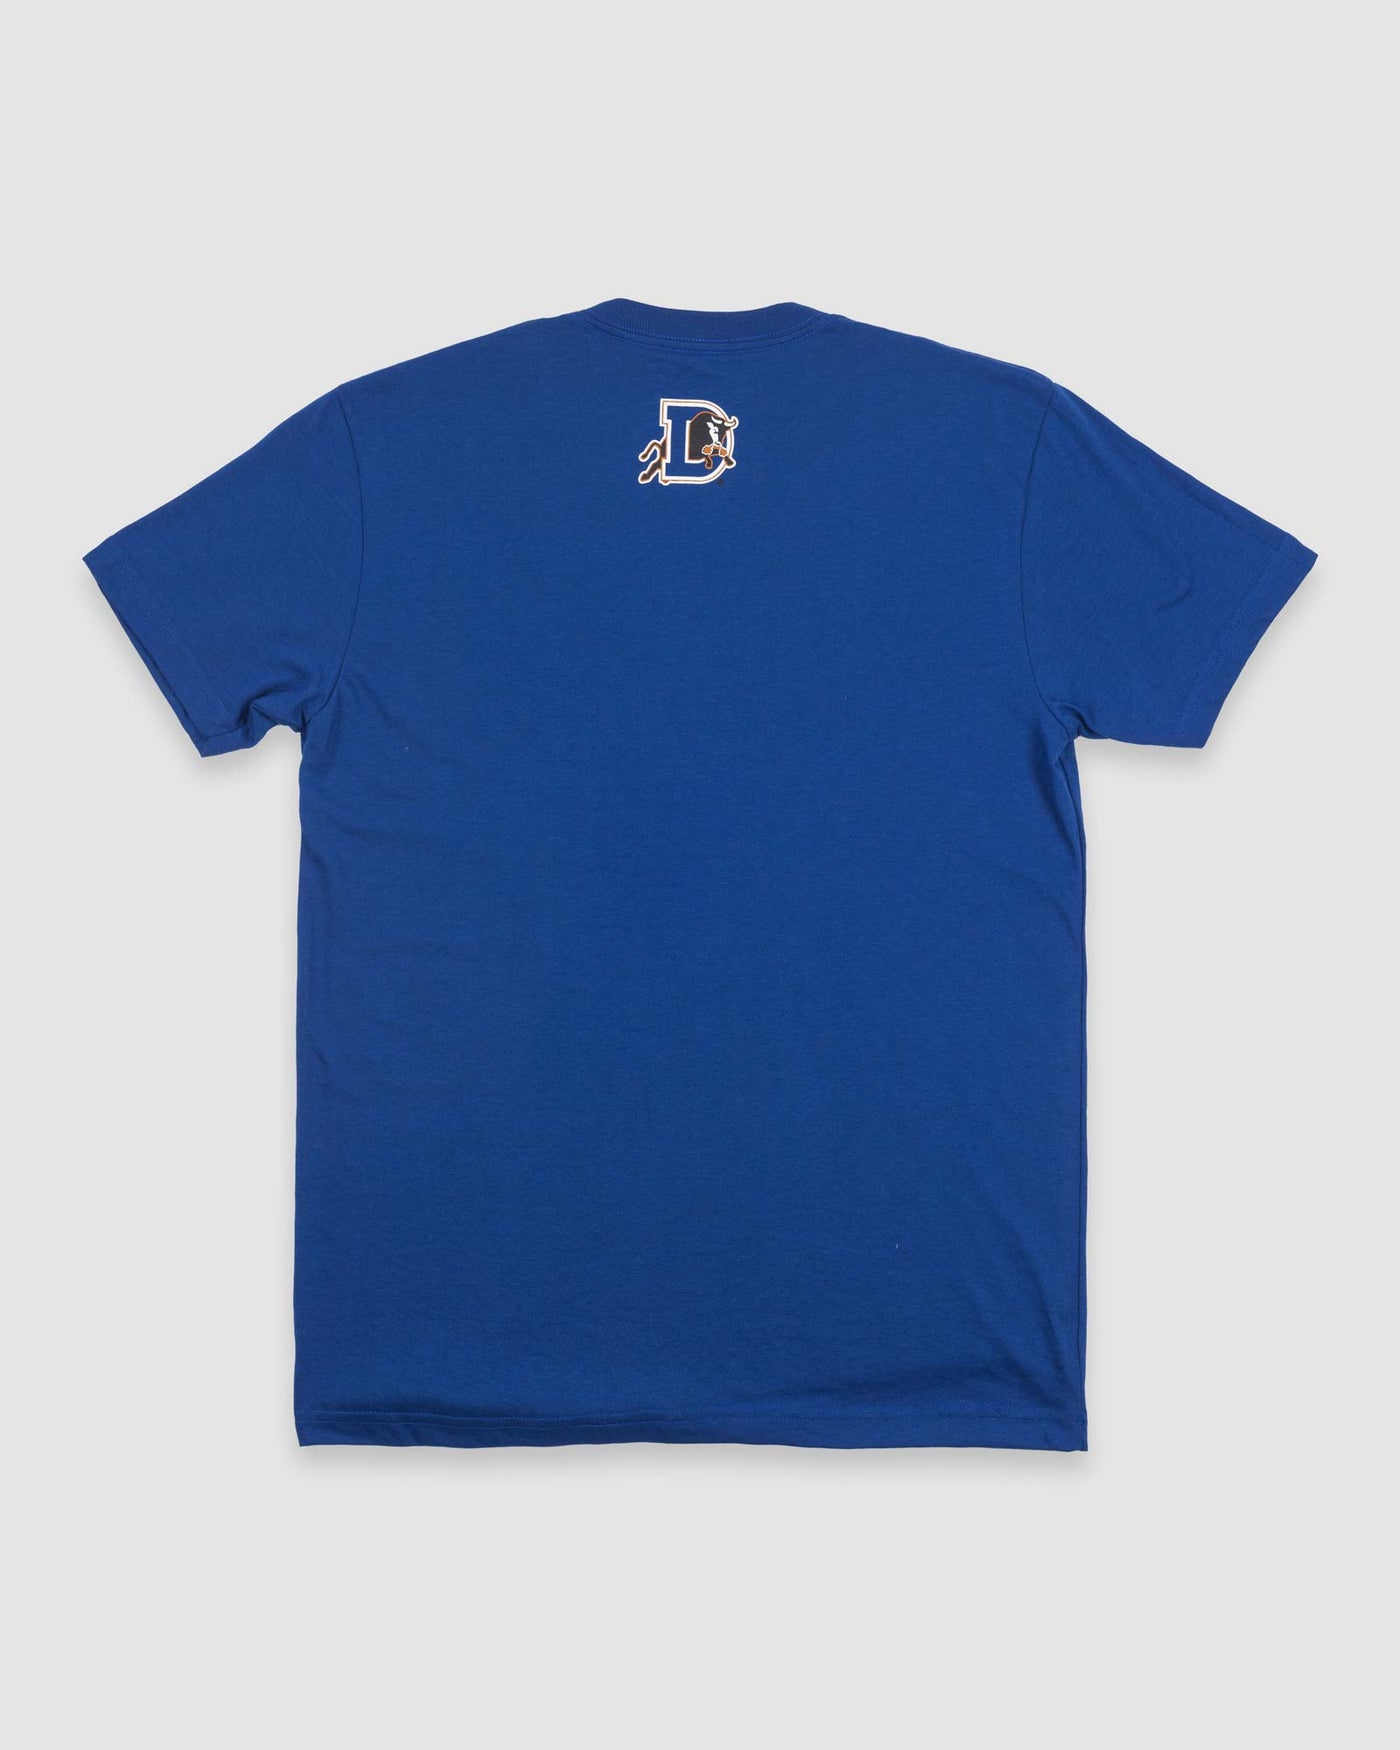 Outfield Fence Tee - Durham Bulls